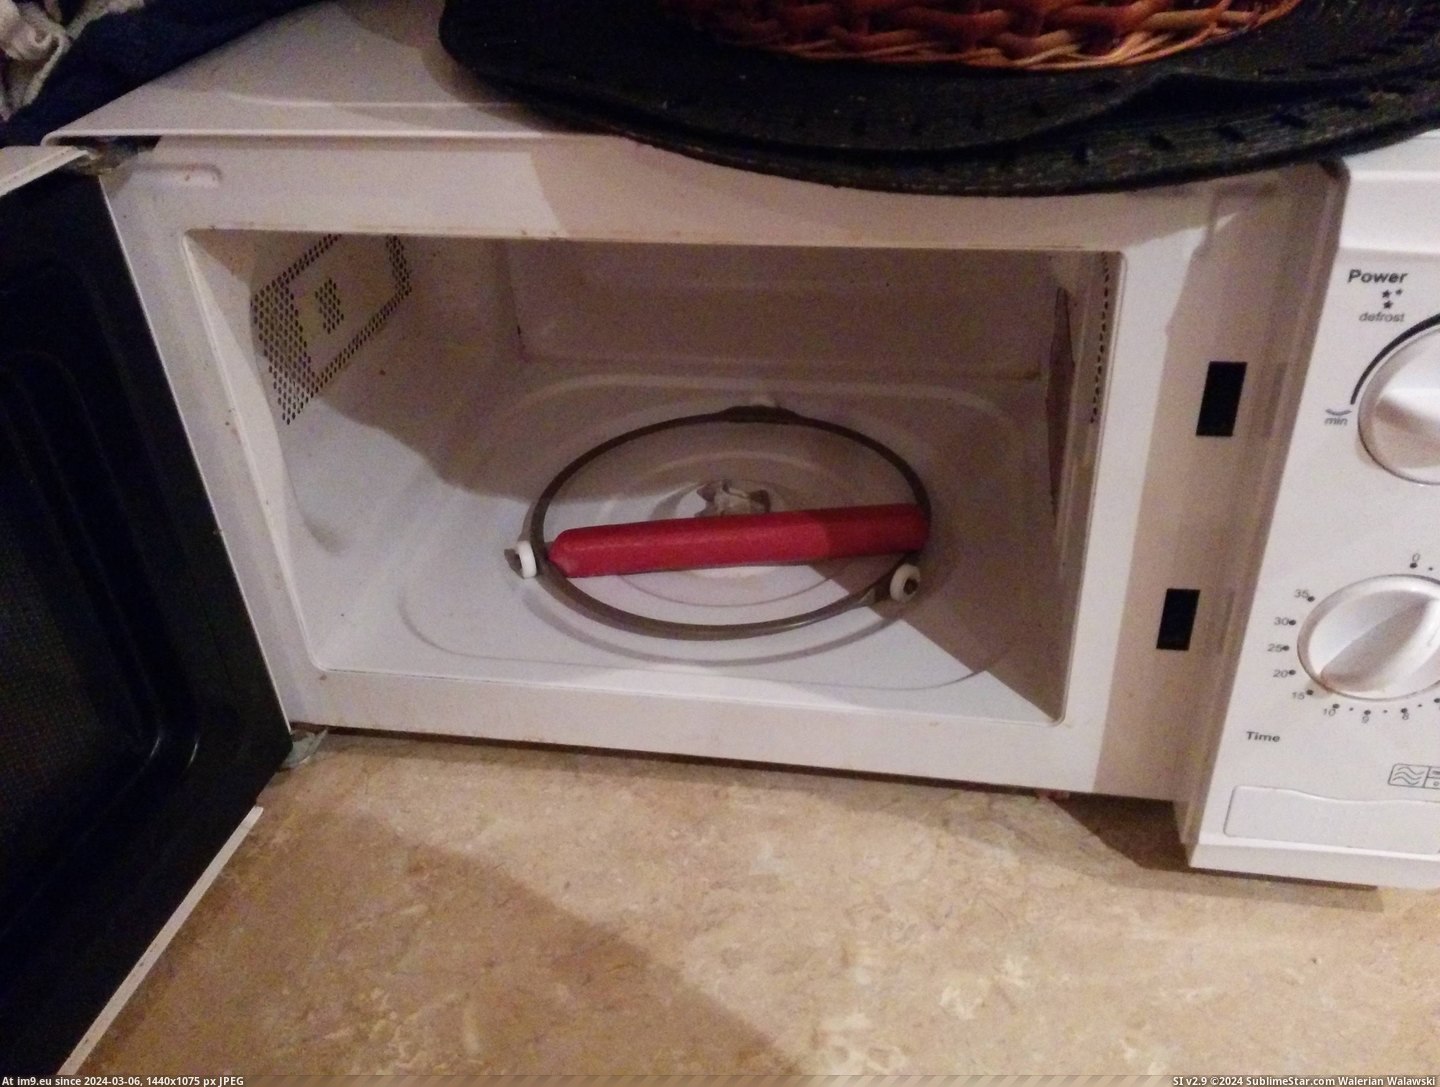 #Light #Speed #Calculating #Sausage #Microwave [Mildlyinteresting] Calculating the speed of light with a sausage (and a microwave) 2 Pic. (Изображение из альбом My r/MILDLYINTERESTING favs))